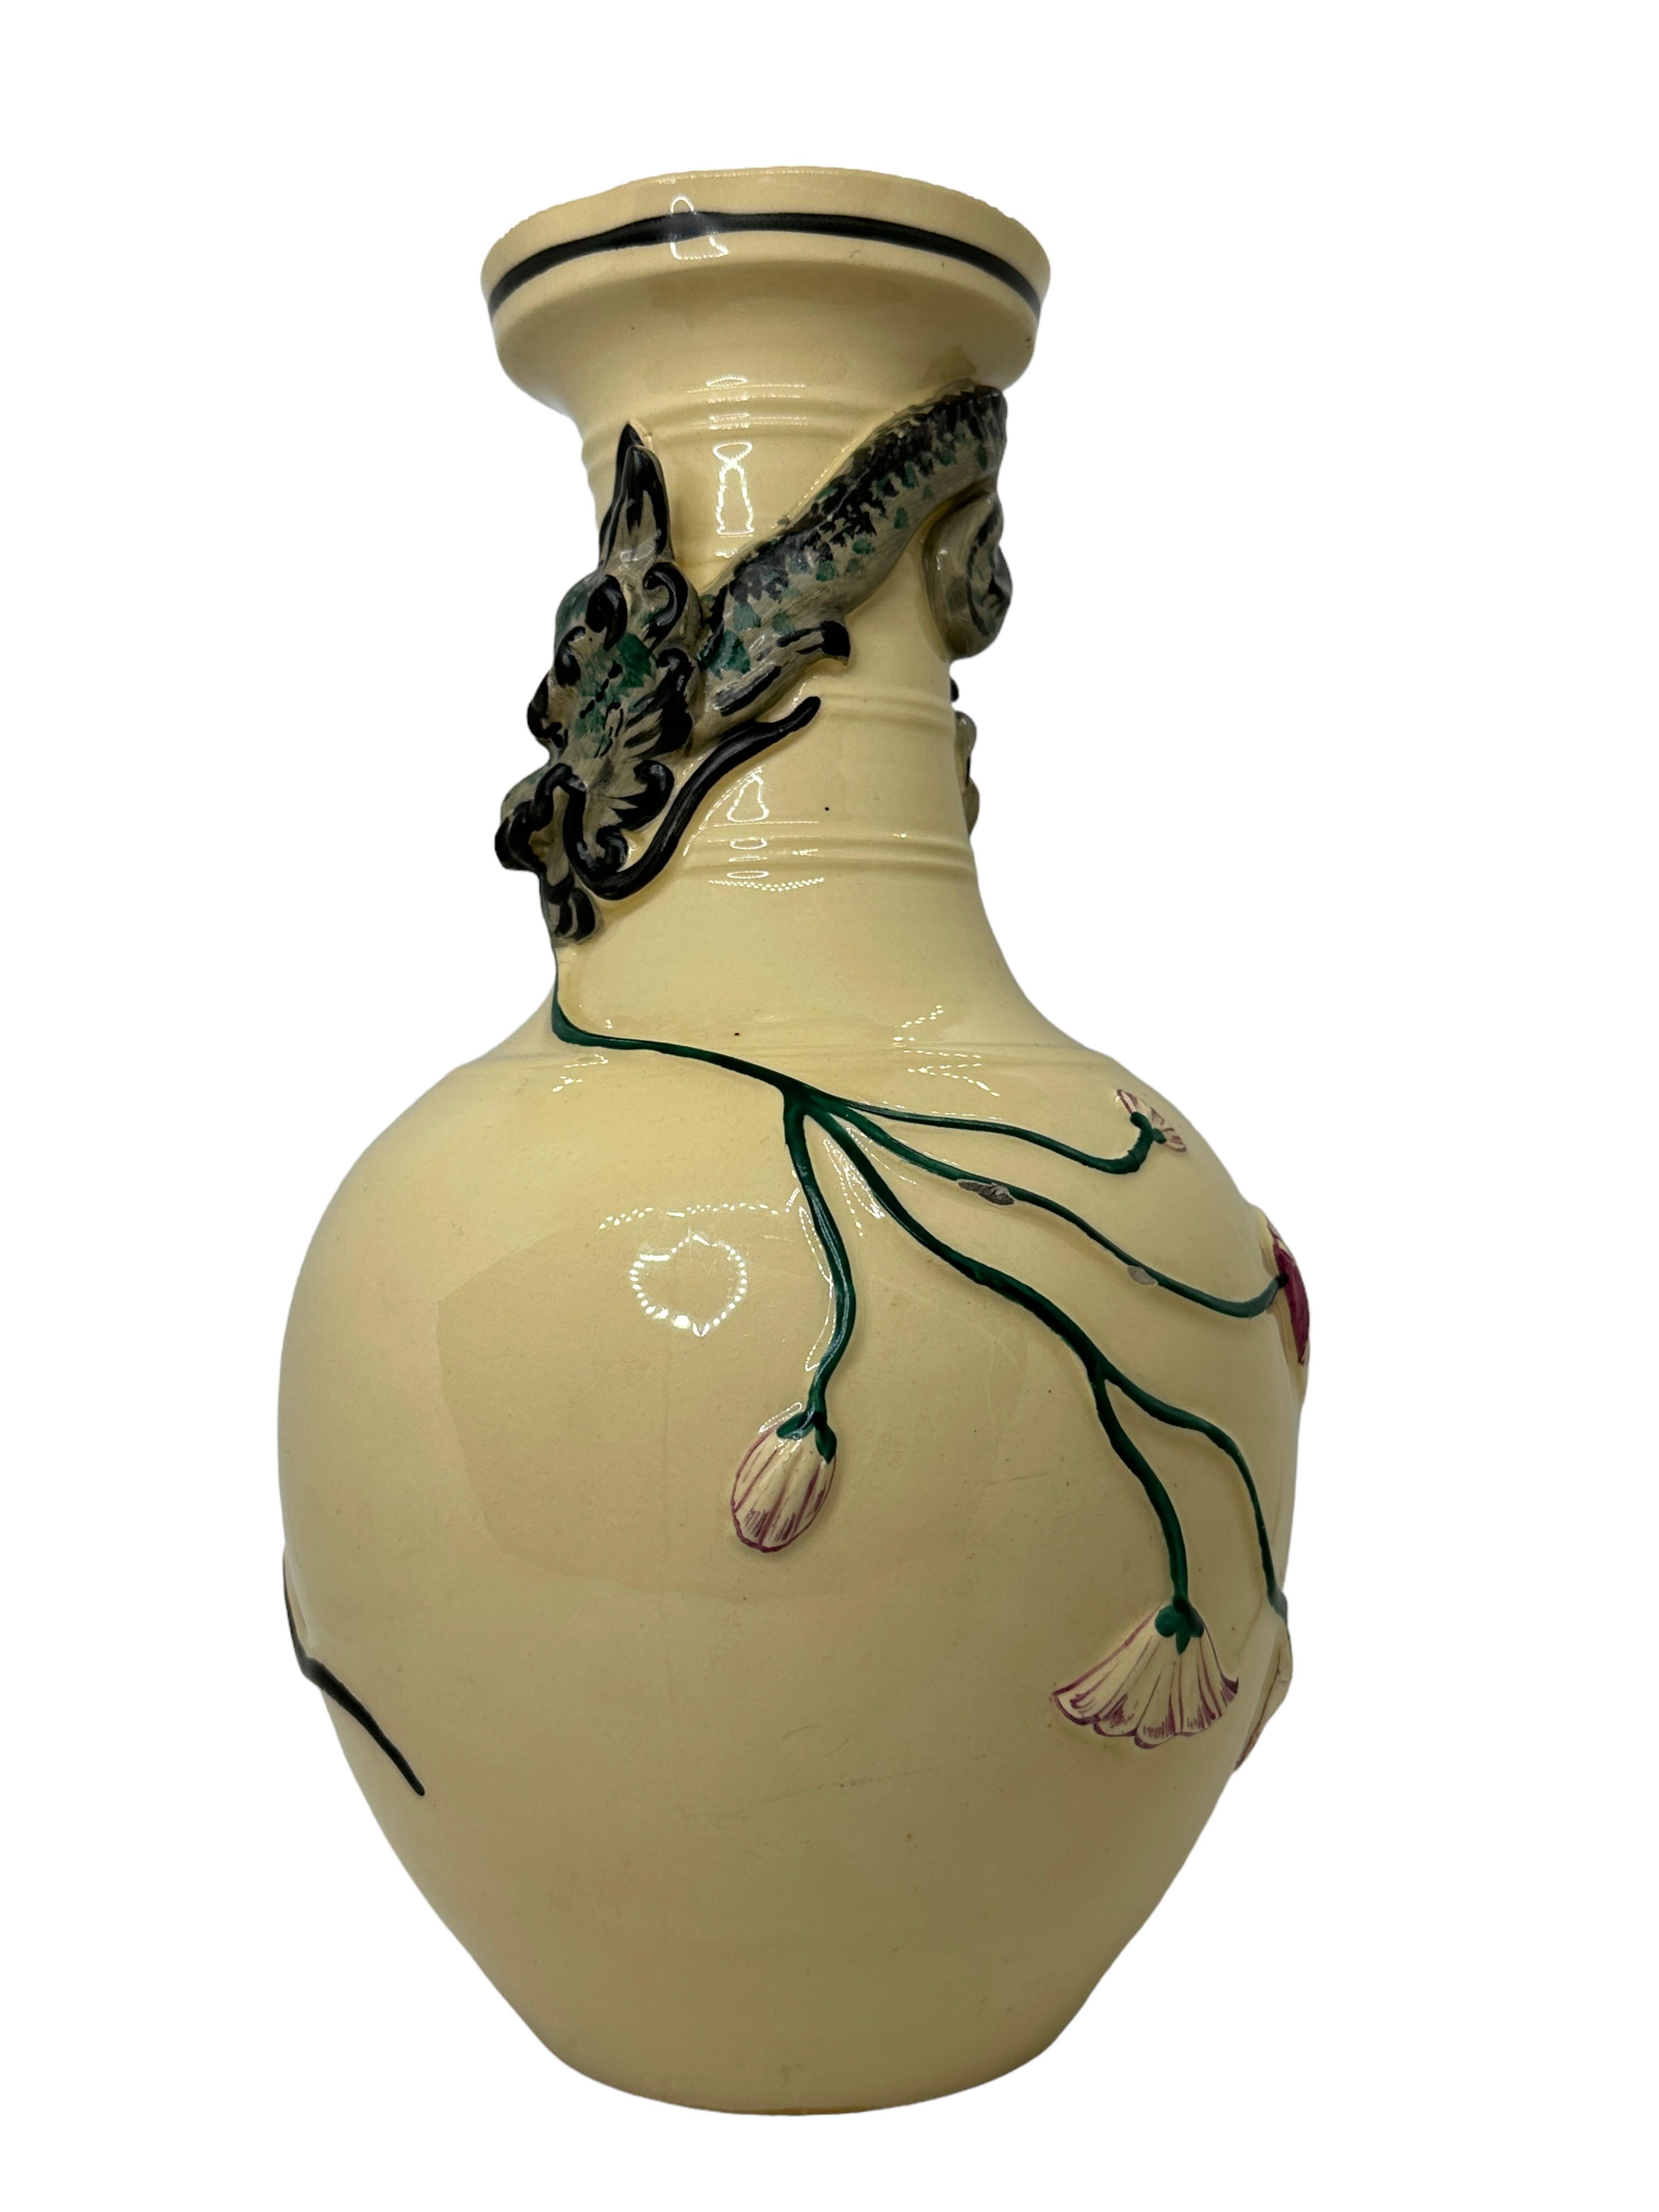 An amazing ceramic early 20th century jug, pitcher or vase made probably in Asia, circa 1900s. This is a heavy vase but you can also use it as a sculpture. Vase is in very good condition with chips like seen in the pictures, no cracks or flea bites.